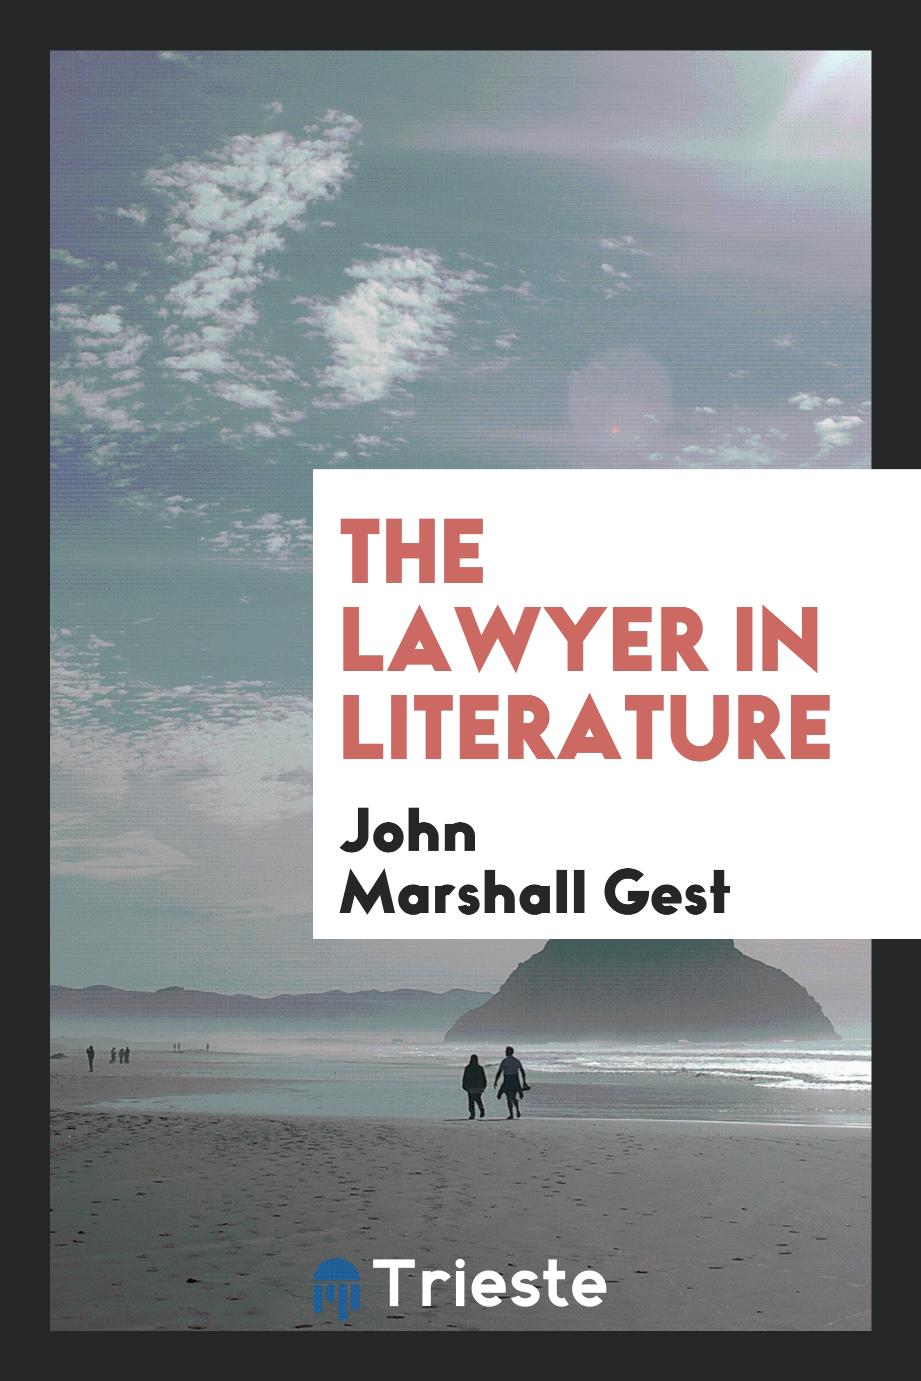 The lawyer in literature